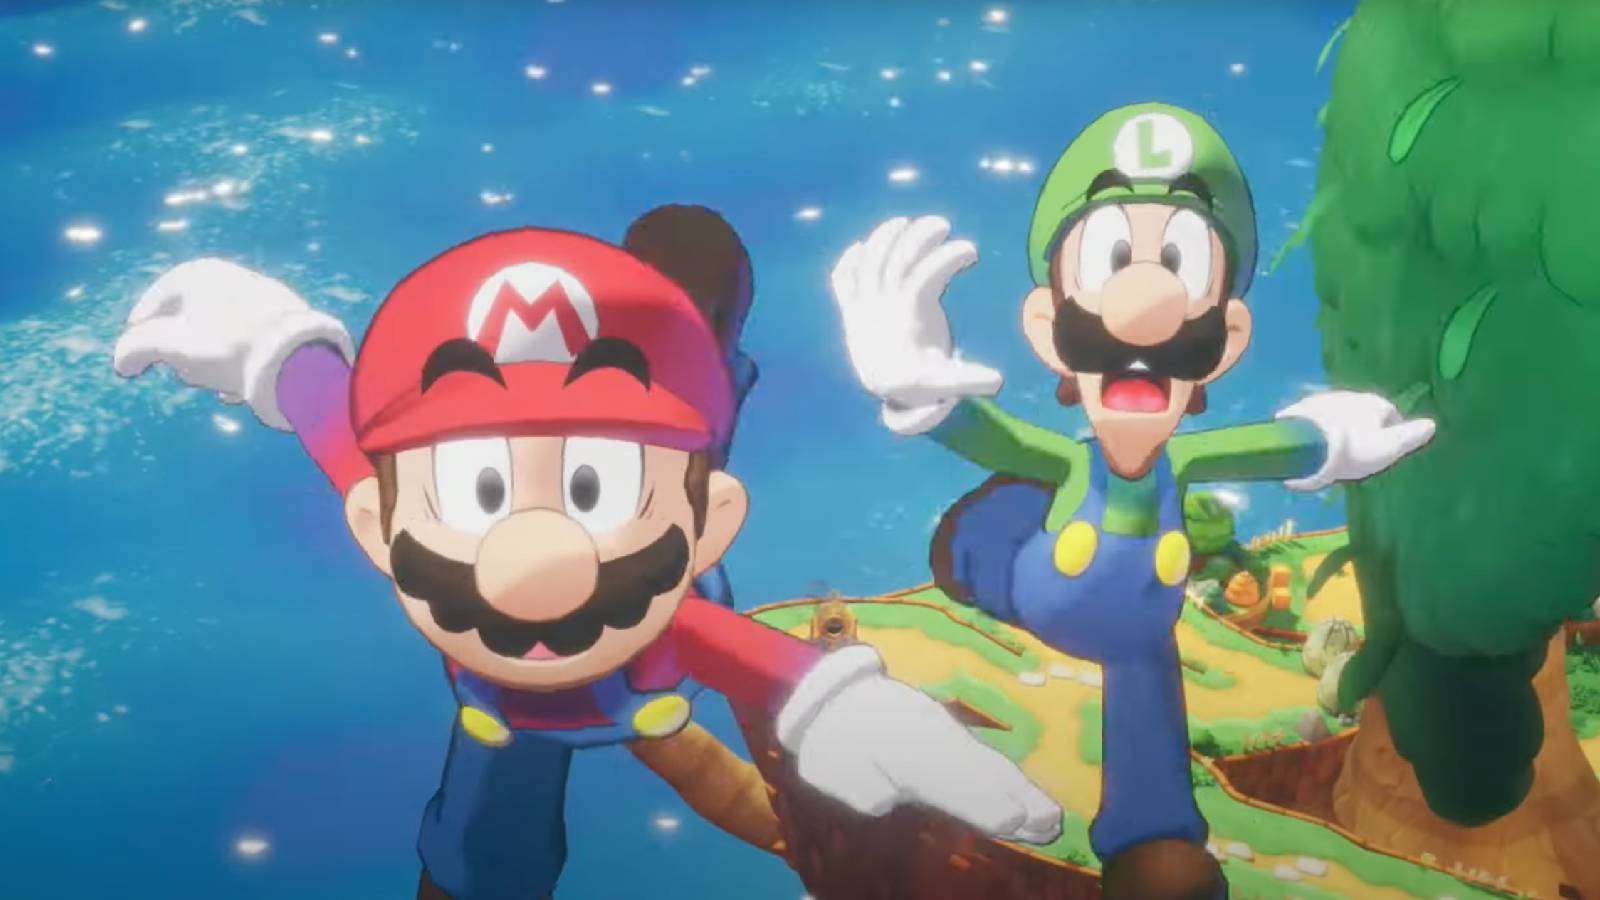 a screenshot from Mario & Luigi Brothership shows the brothers being shot out of a cannon